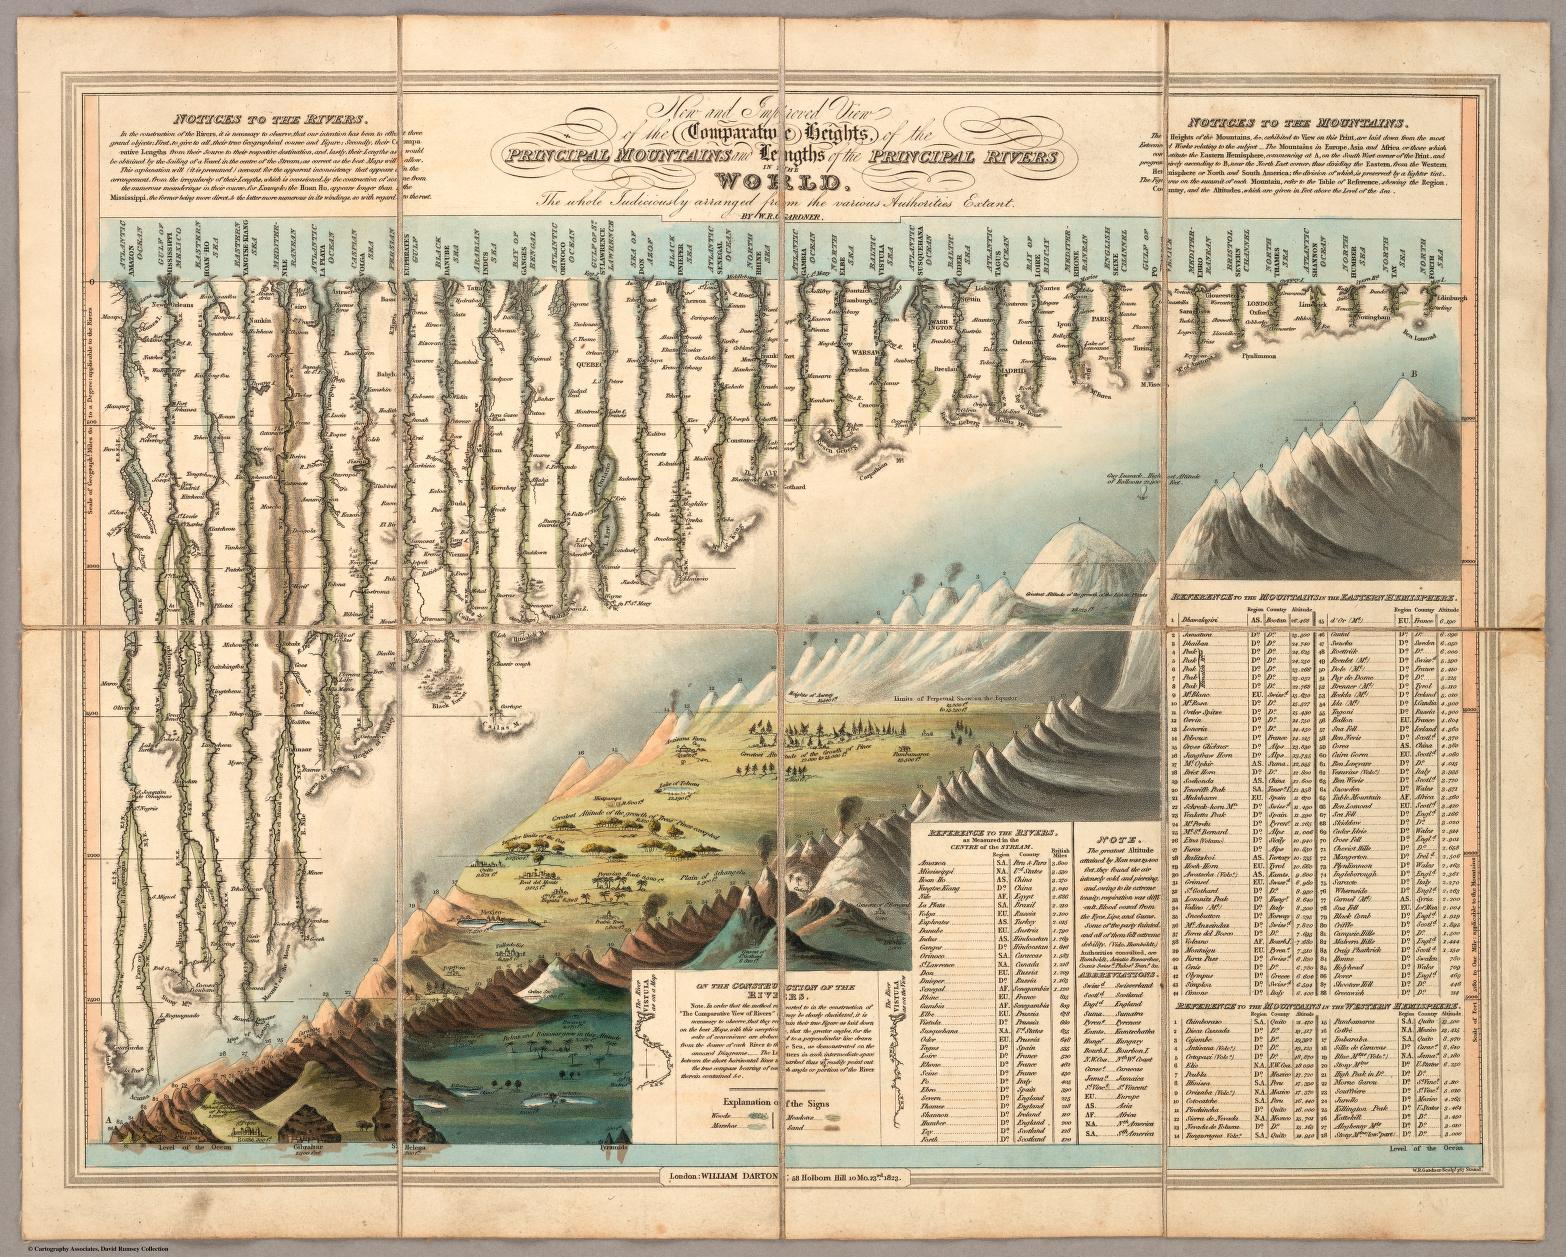 Gardner’s Comparative Heights of Mountains and Rivers, 1823